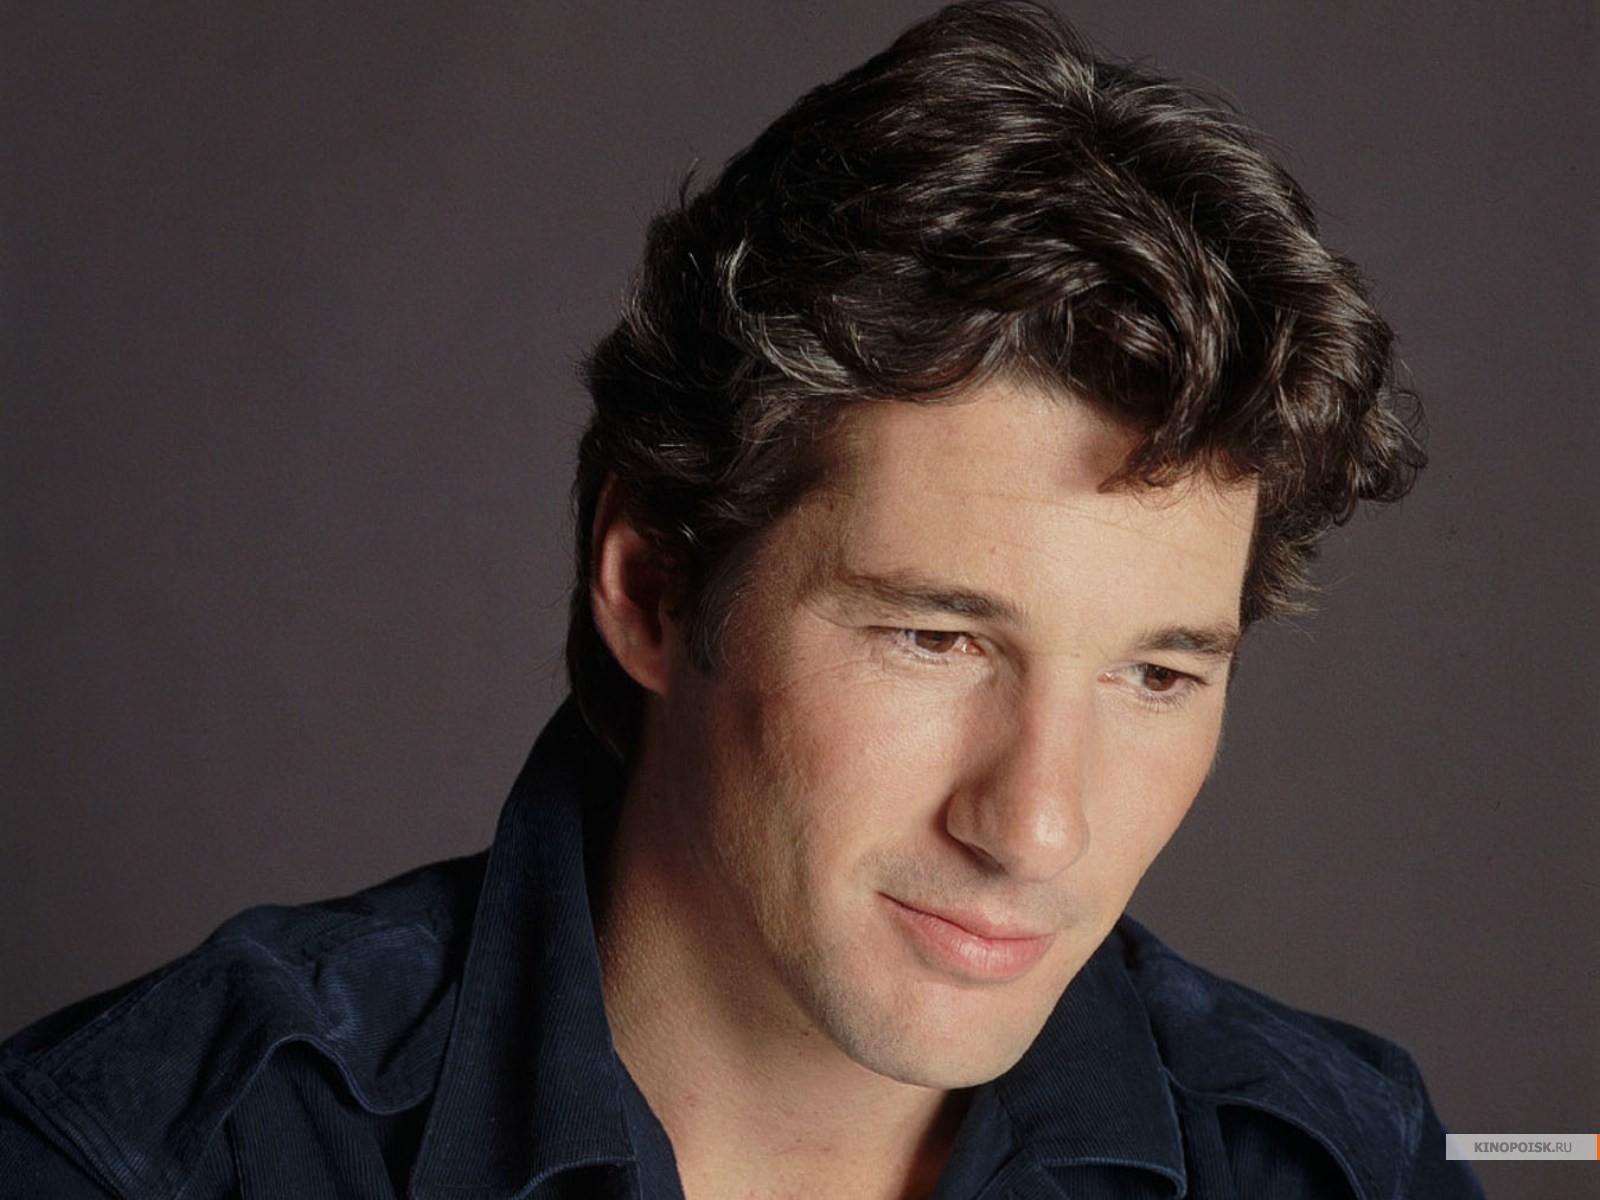 Richard Gere - Picture Gallery